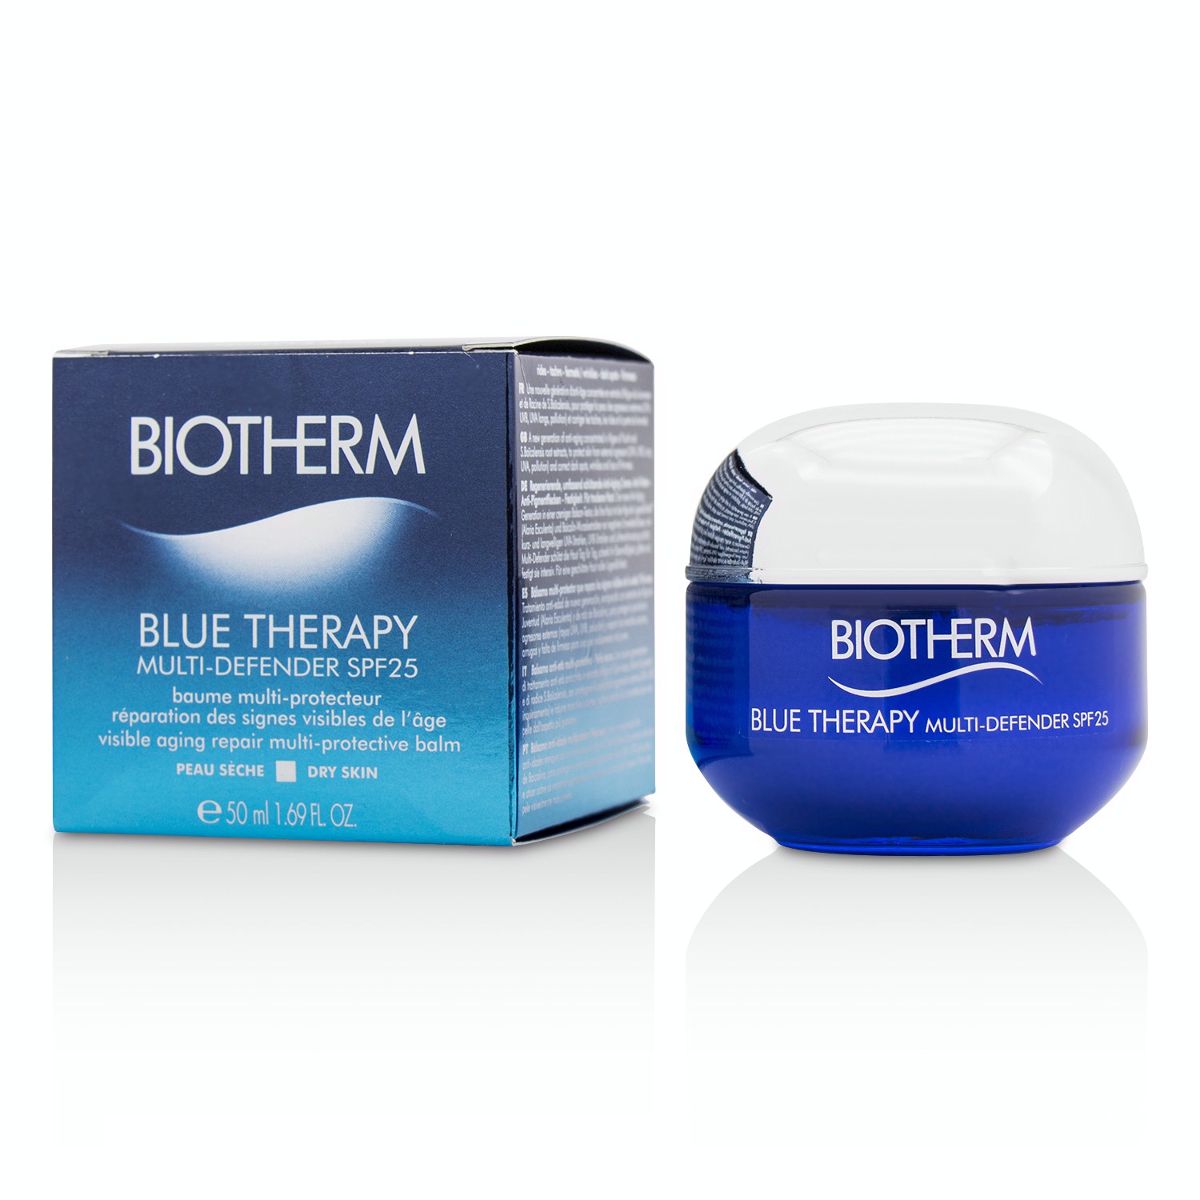 Blue Therapy Multi-Defender SPF 25 - Dry Skin Biotherm Image